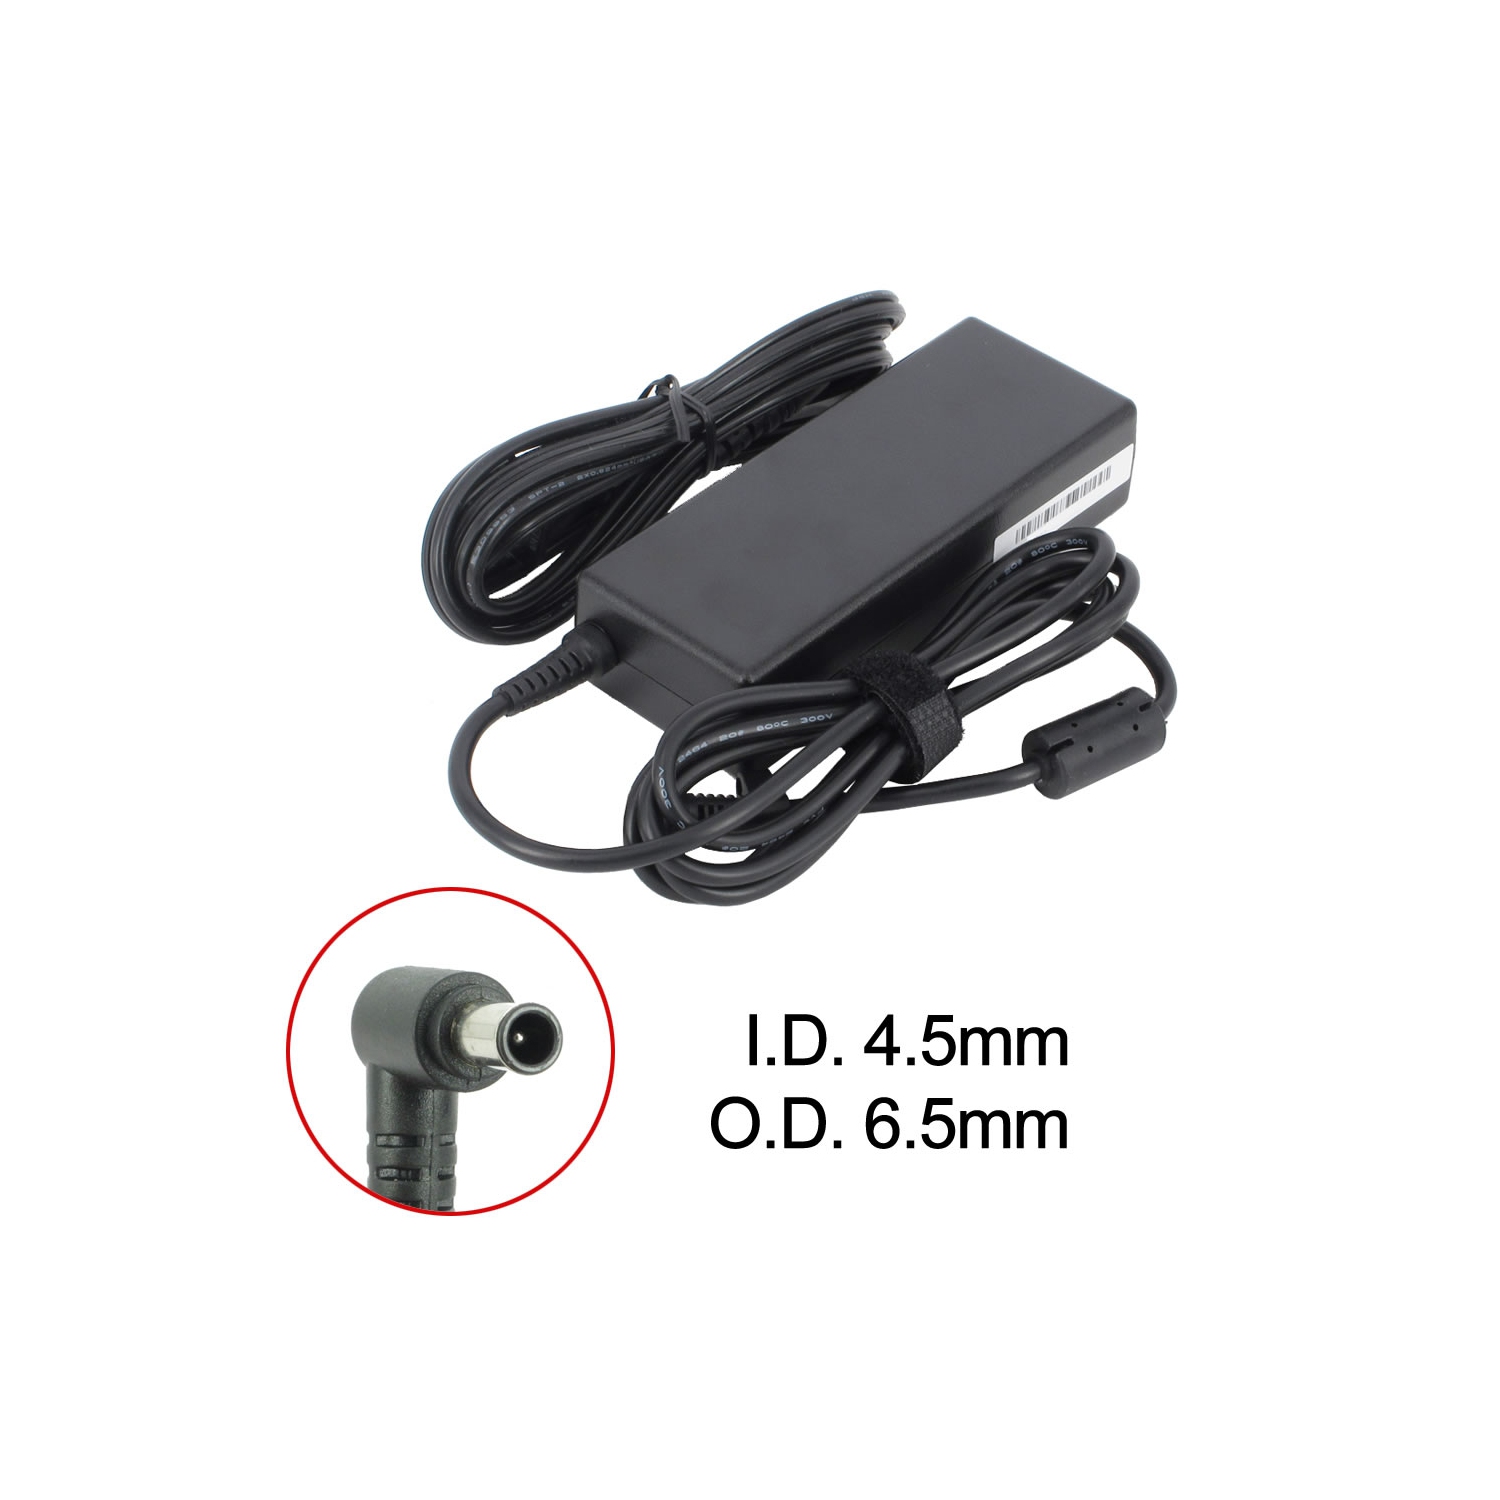 Brand New Laptop AC Adapter for Sony VAIO VGN-FE35TP, PCGA-AC19V10, PCGA-AC19V3, VGP-AC19V20, VGP-AC19V30, VGP-AC19V51